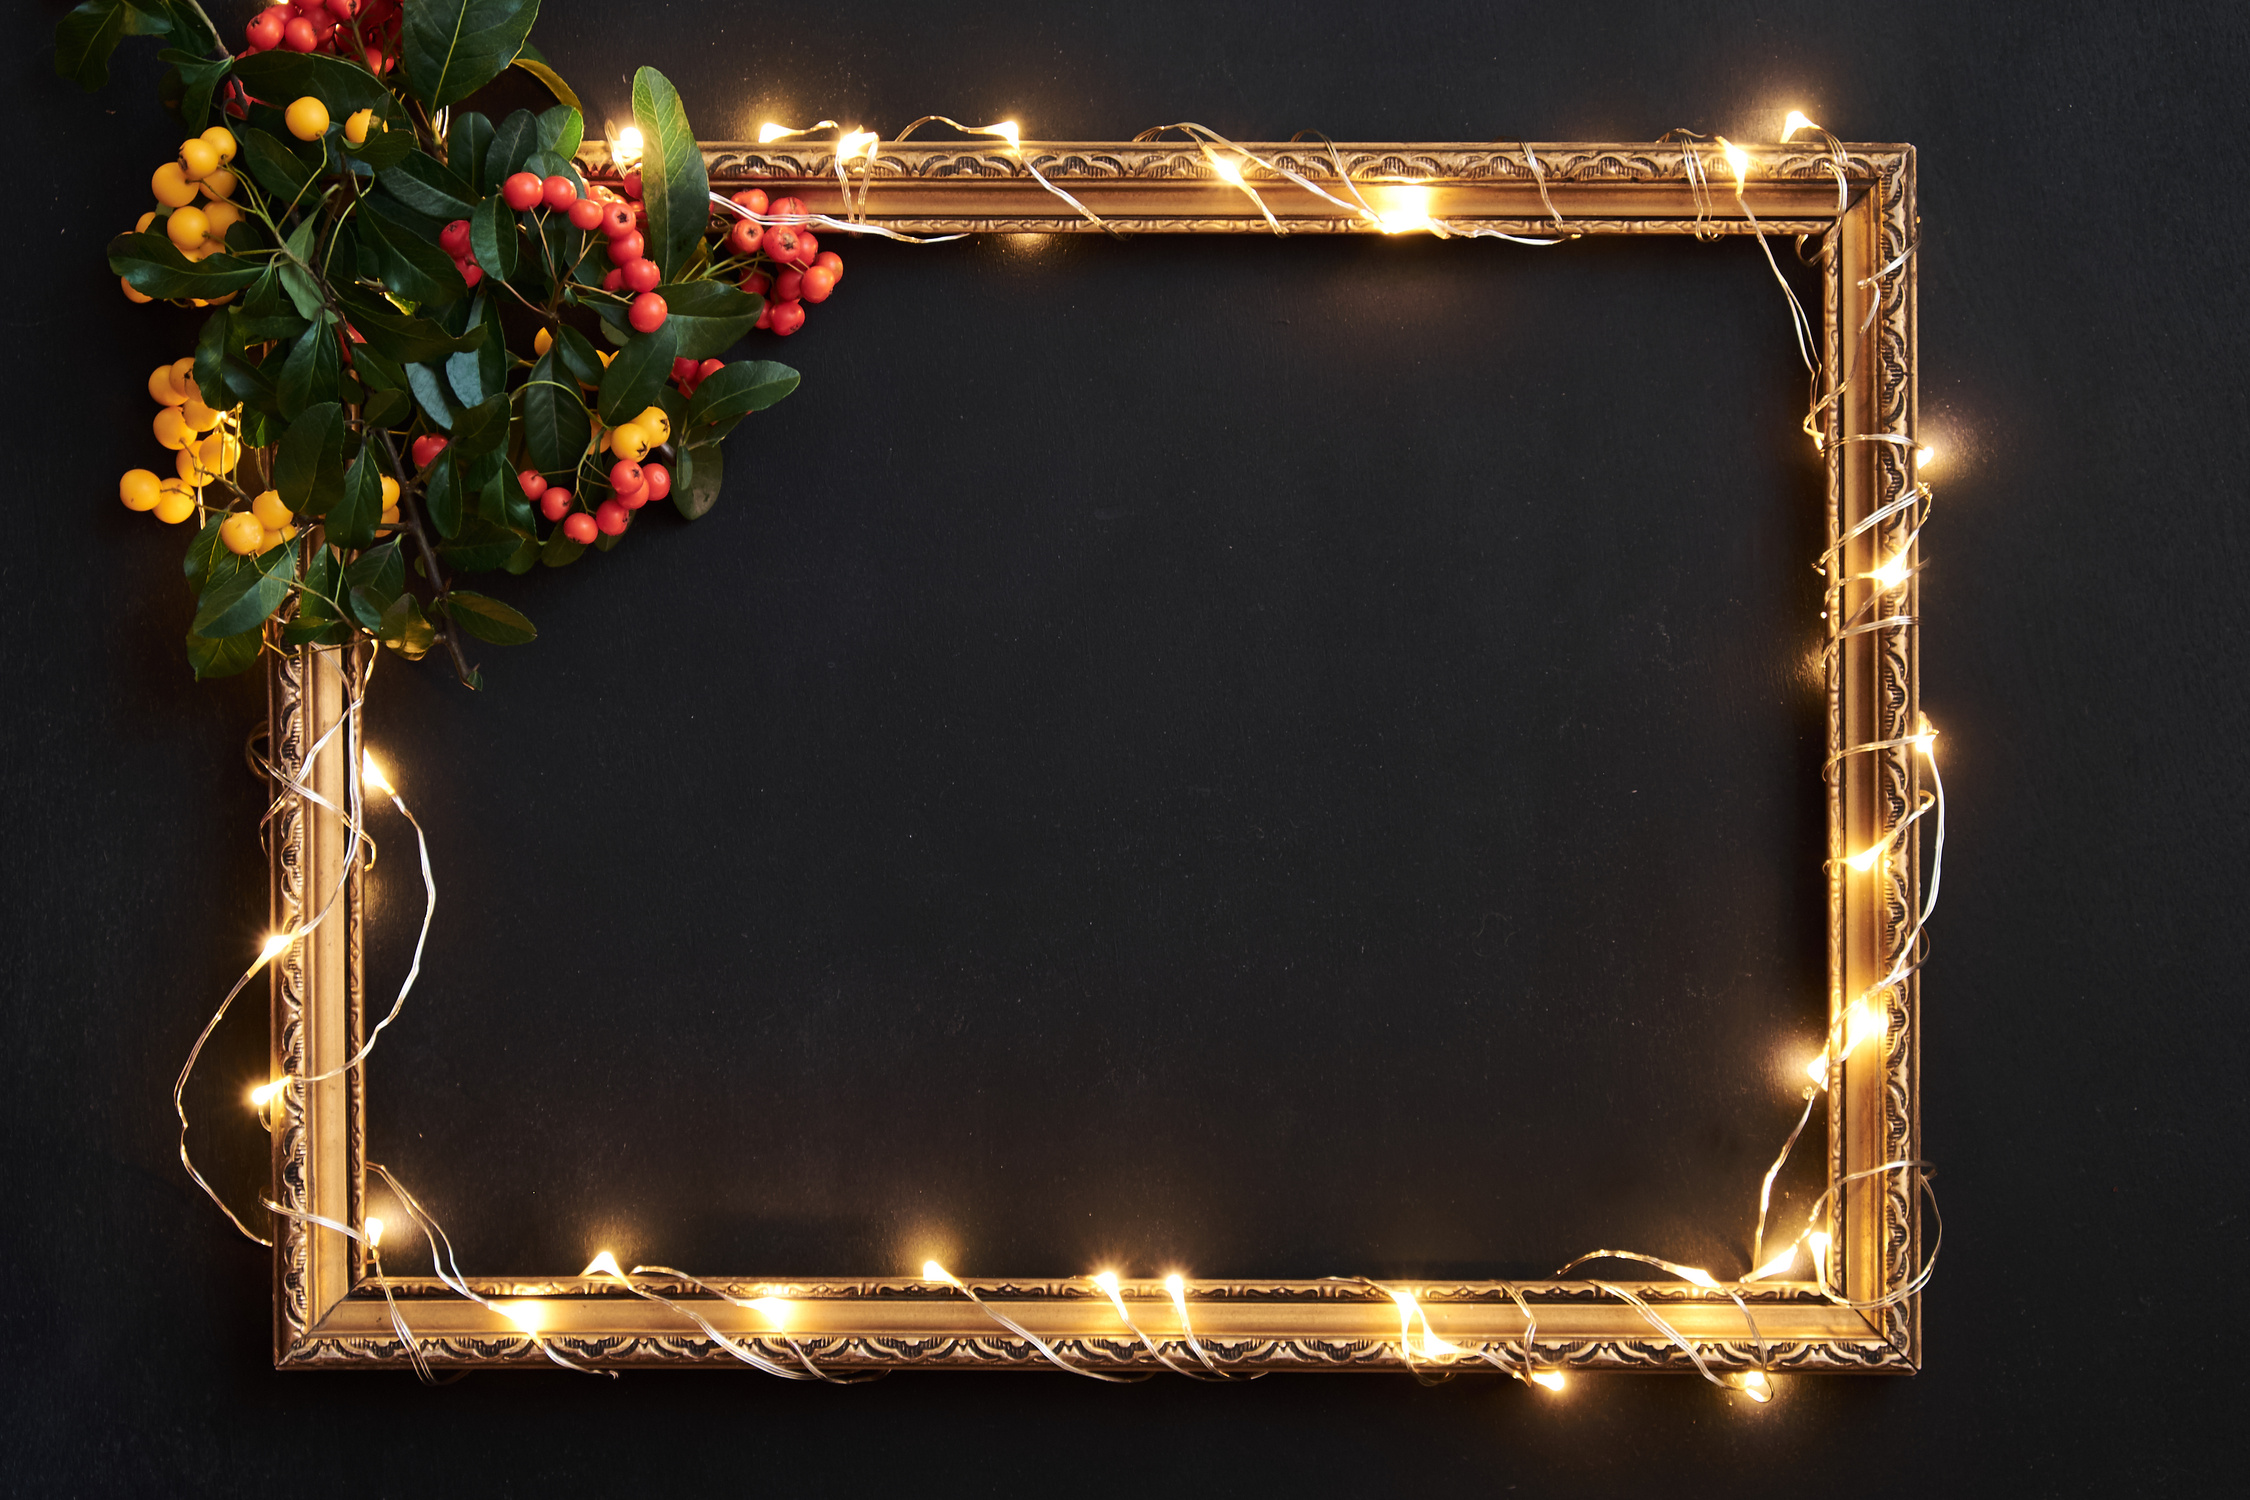 Christmas decor on blackboard with space for text